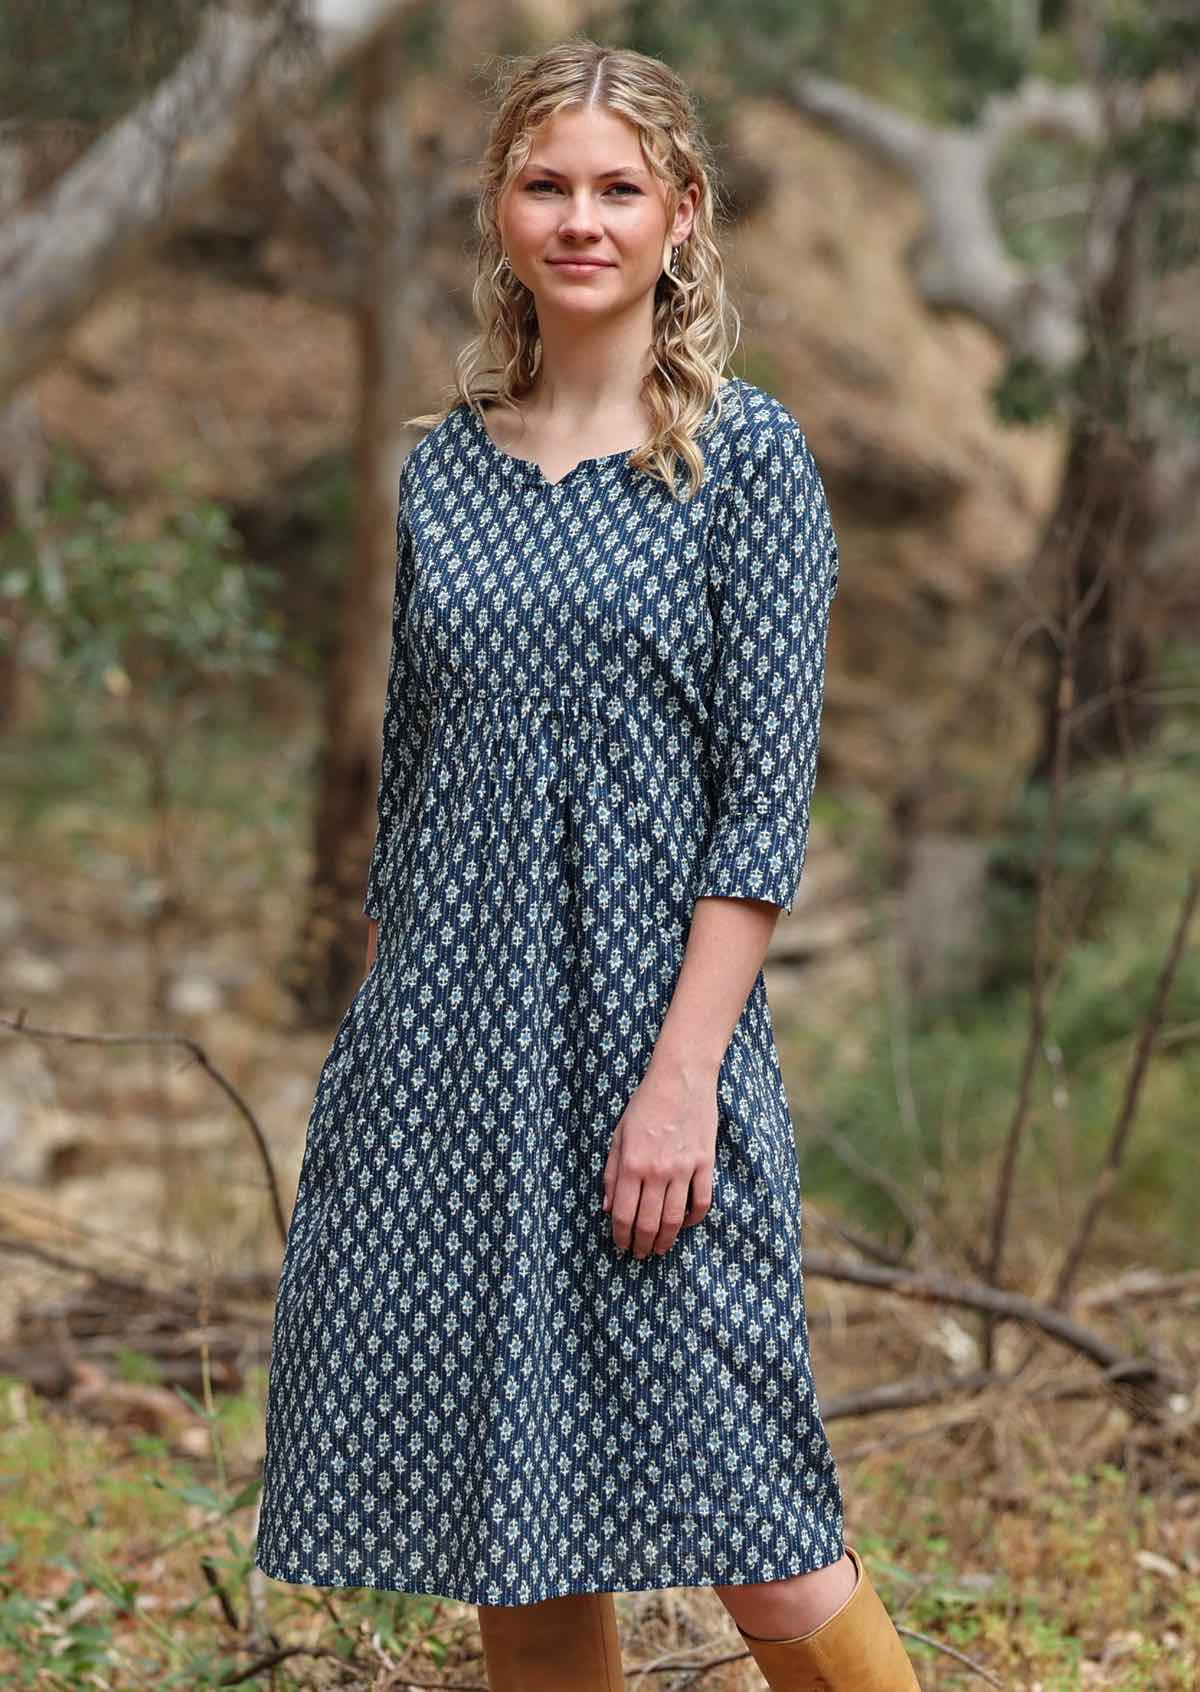 Round neckline with cutout, 3/4 sleeves, pockets